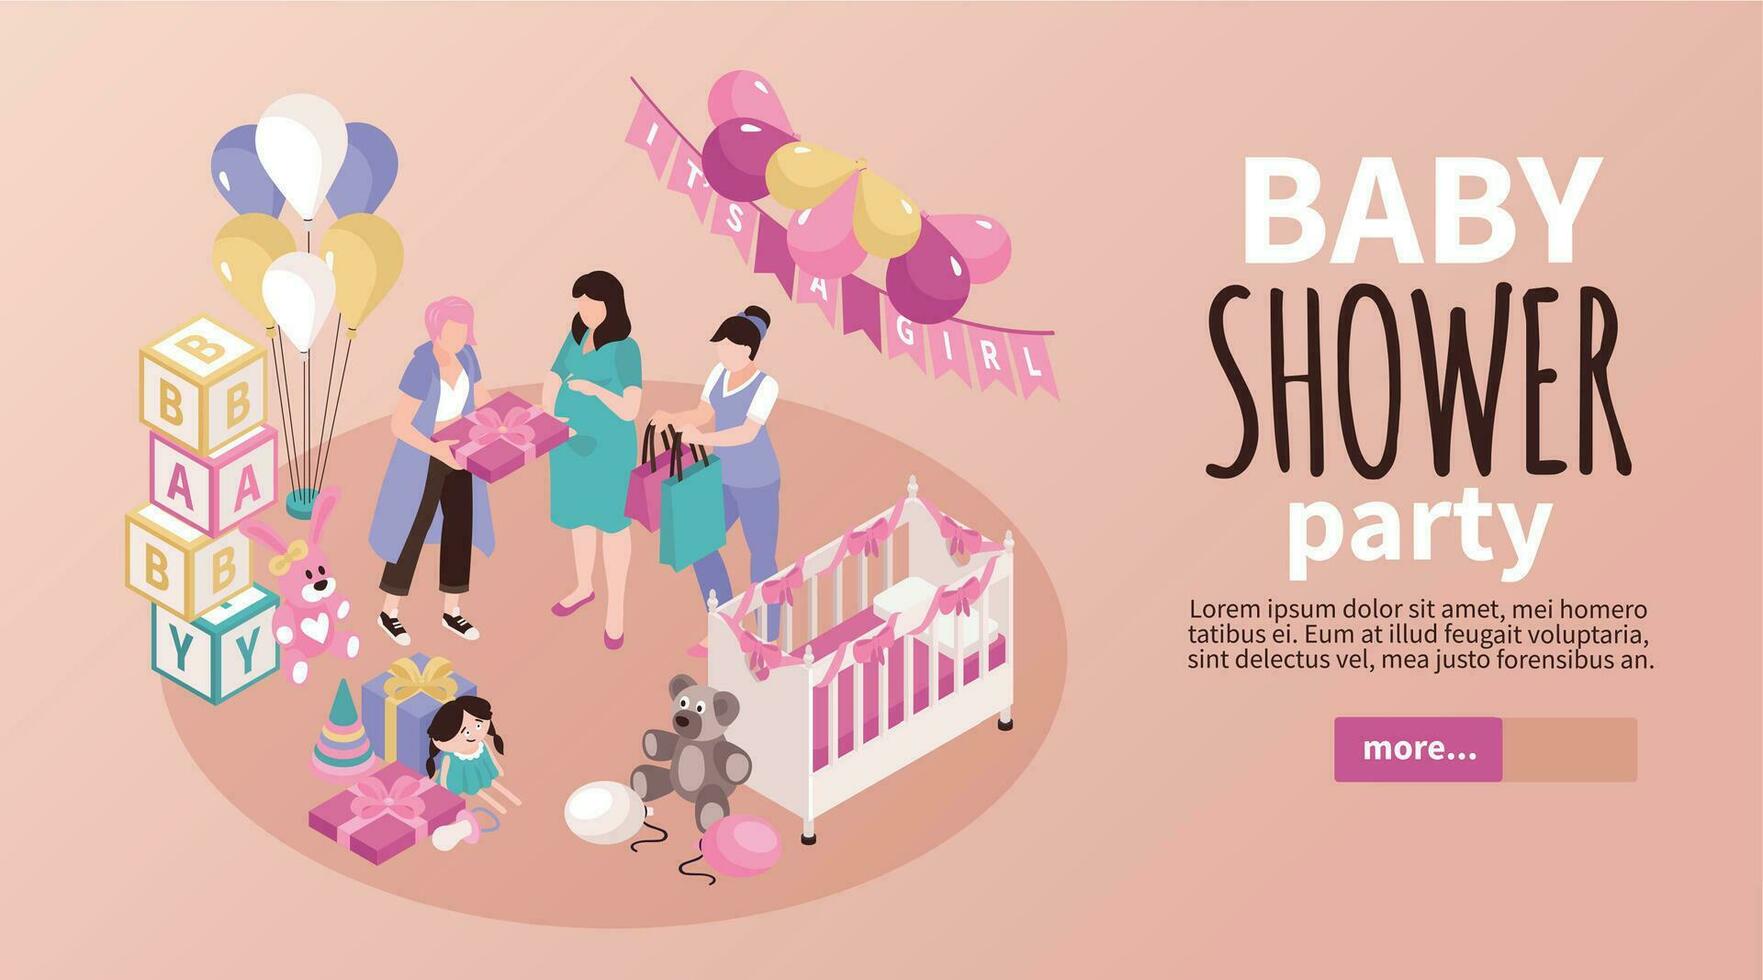 banner orizzontale baby shower vettore